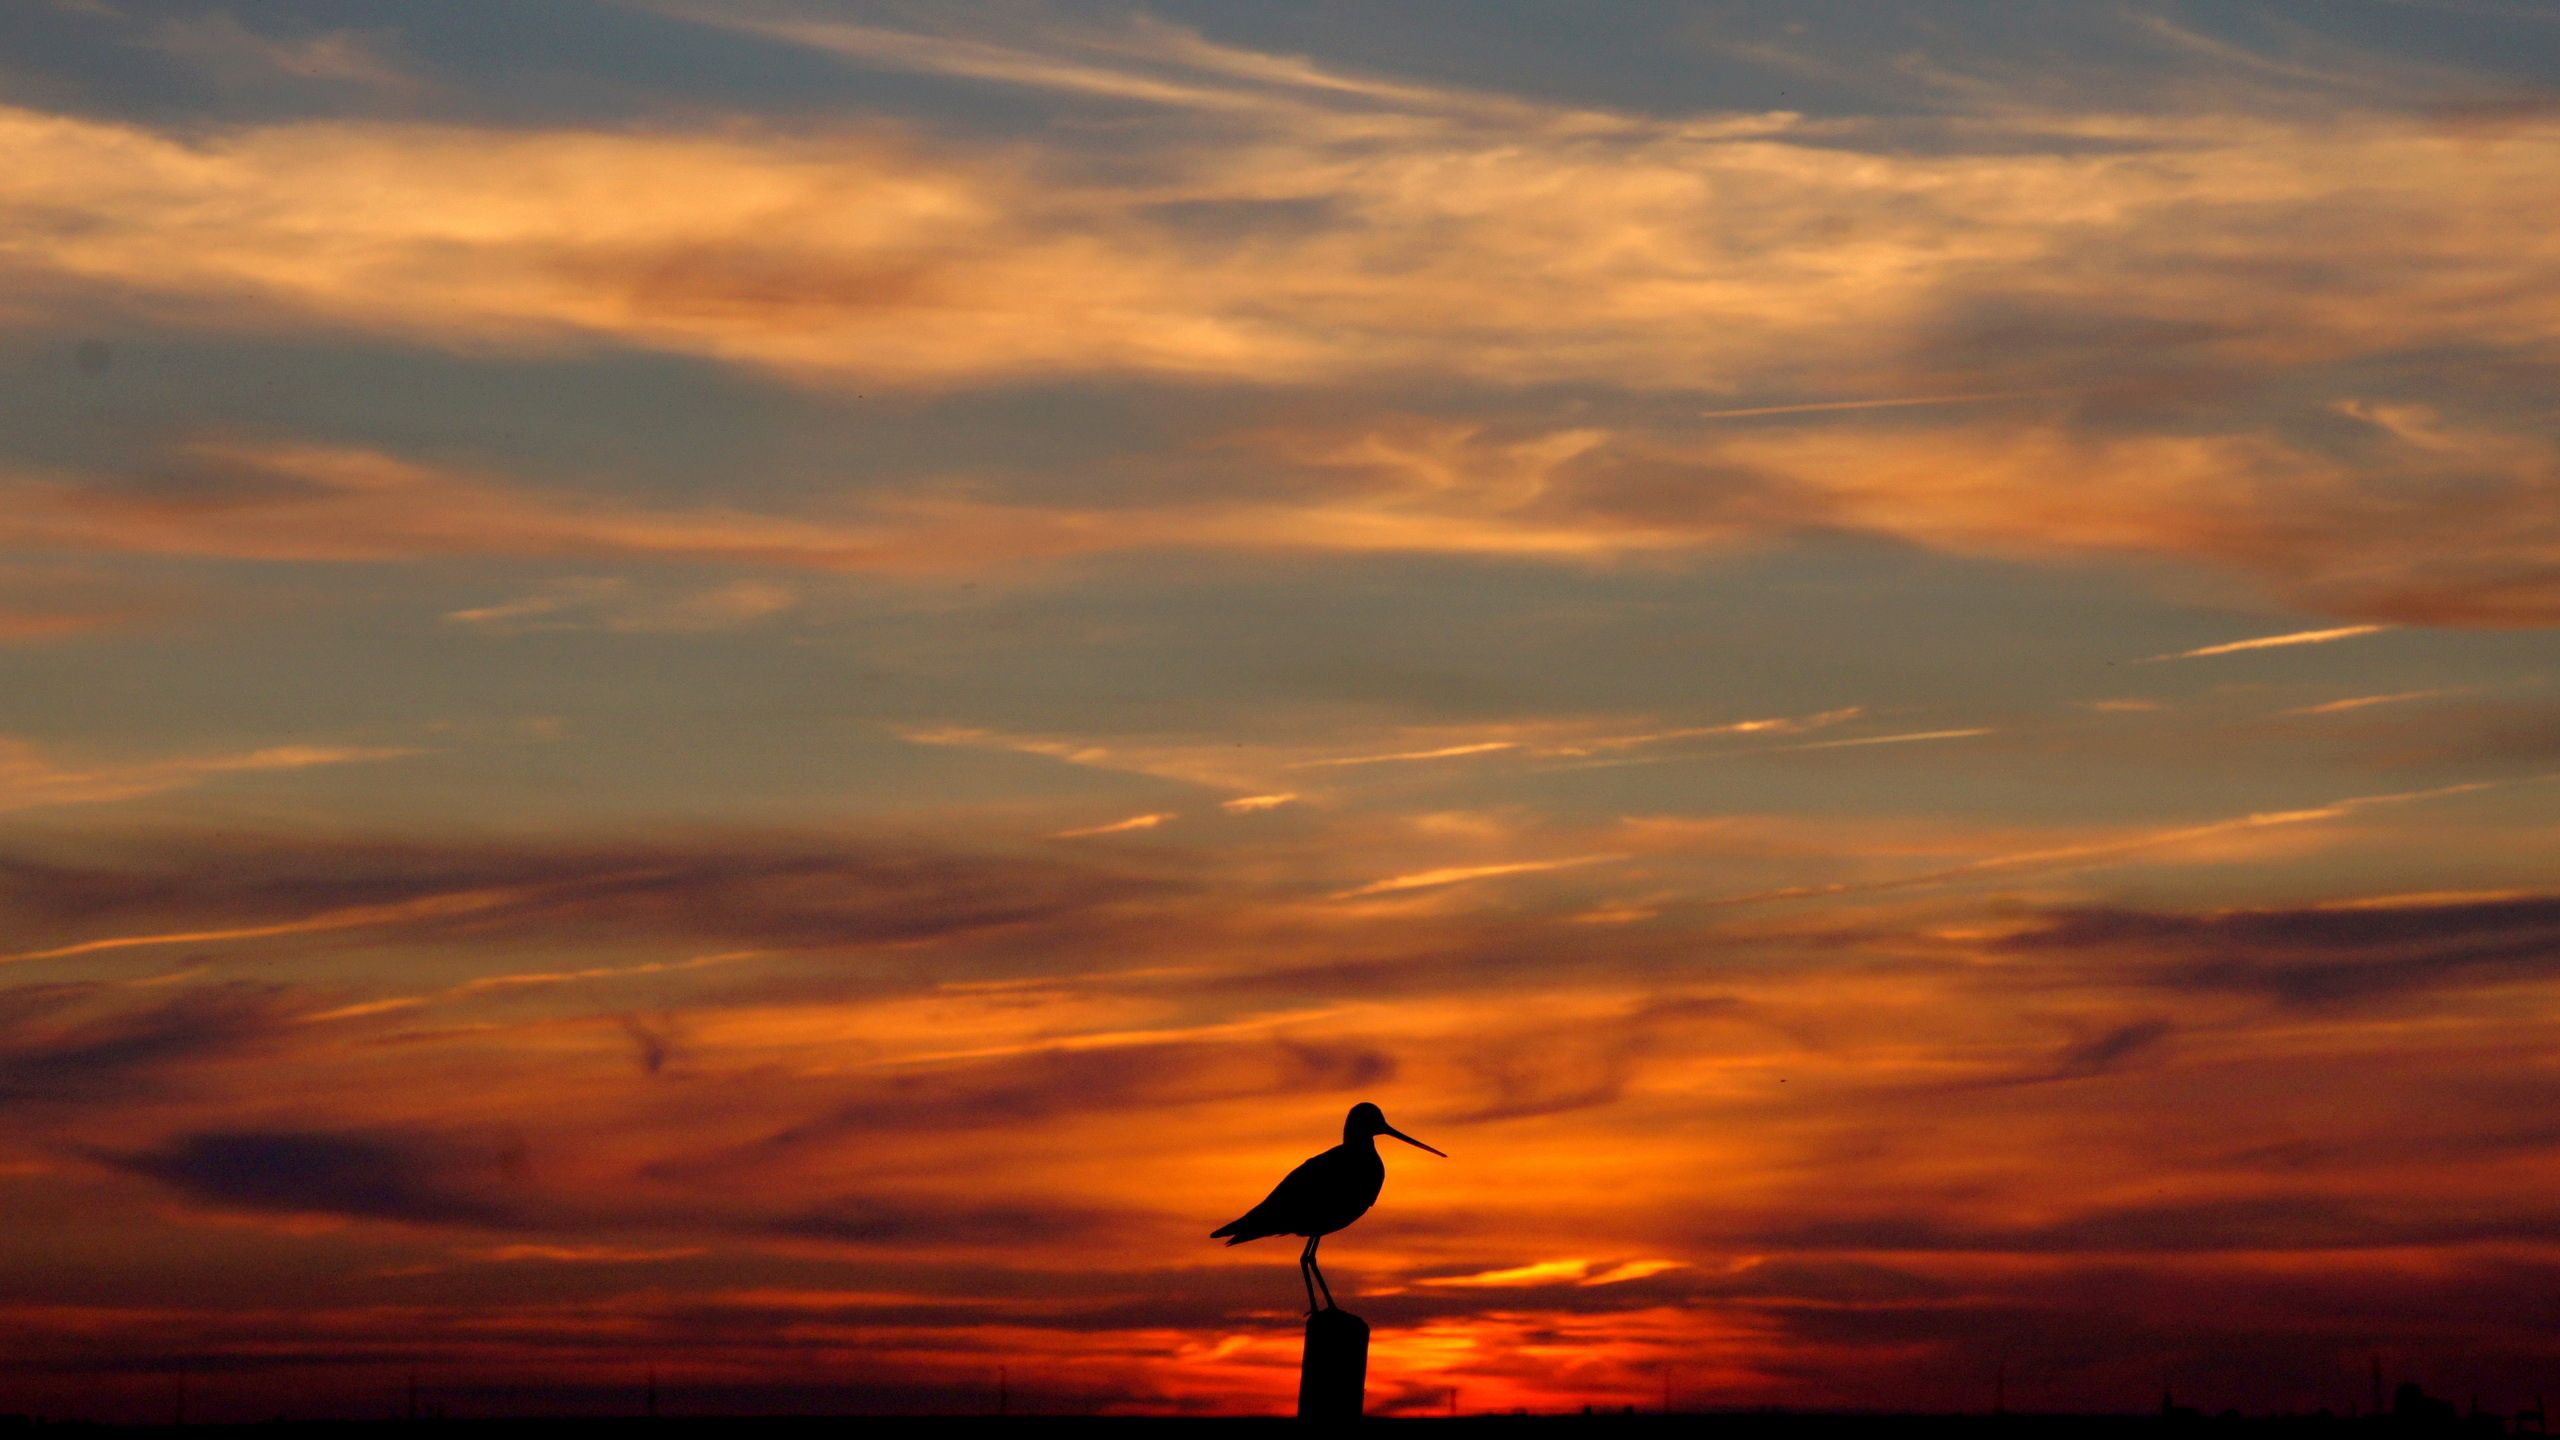 118148 download wallpaper nature, sunset, sky, orange, bird, outlines, evening screensavers and pictures for free